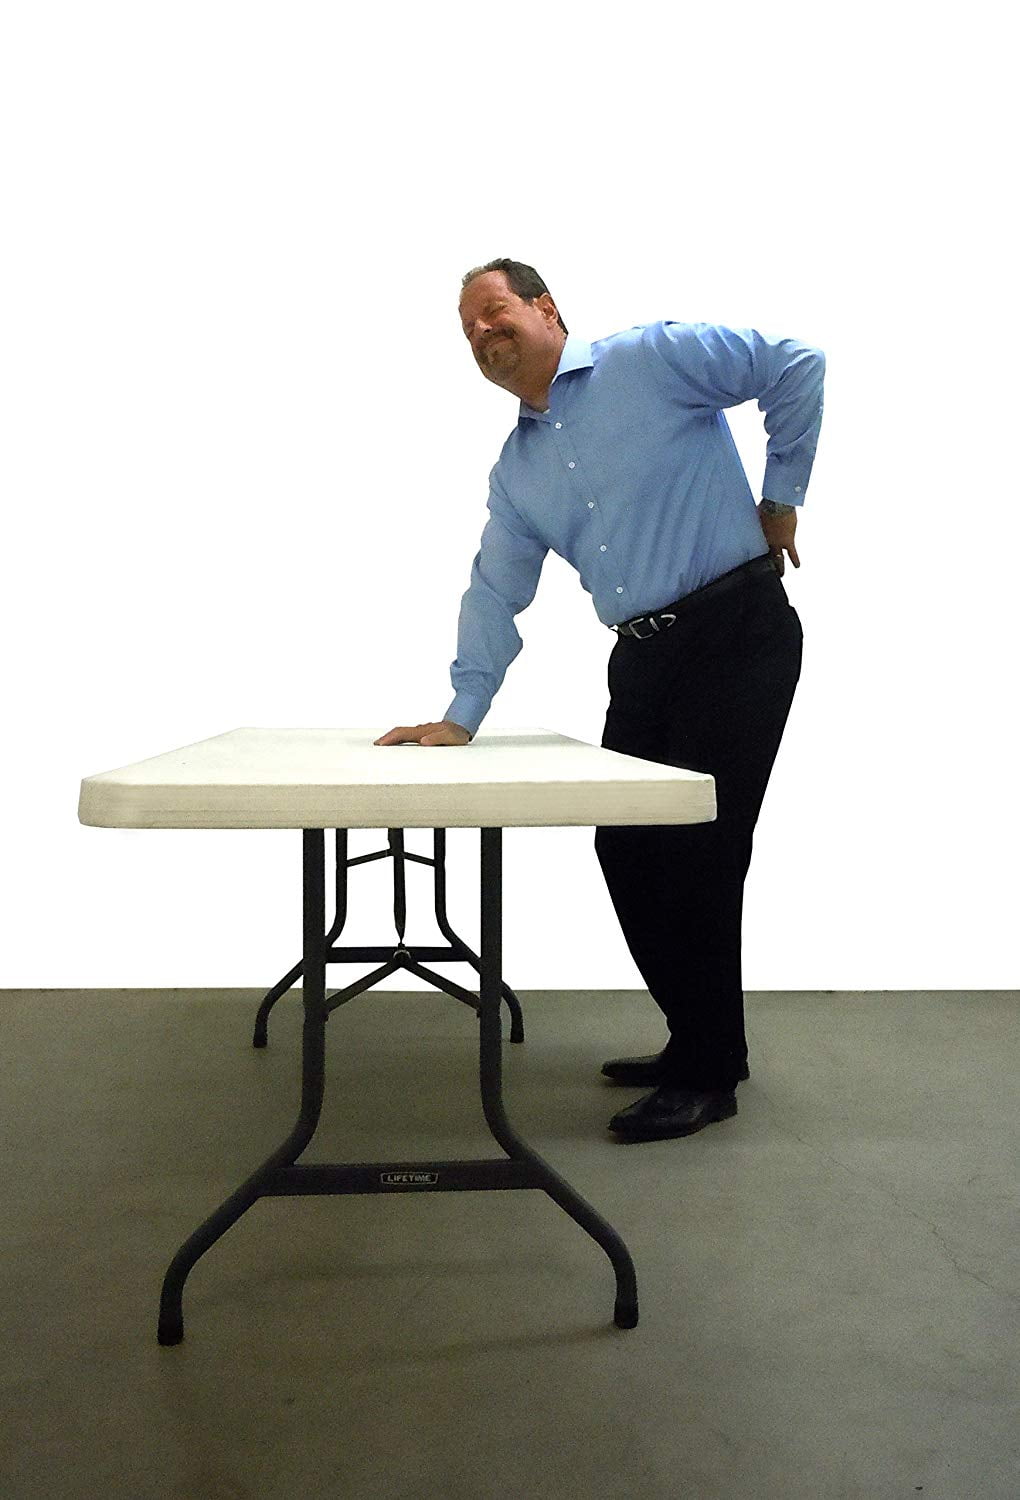 Save Your Back Kit For Folding Table You Already Own Lift Your Table